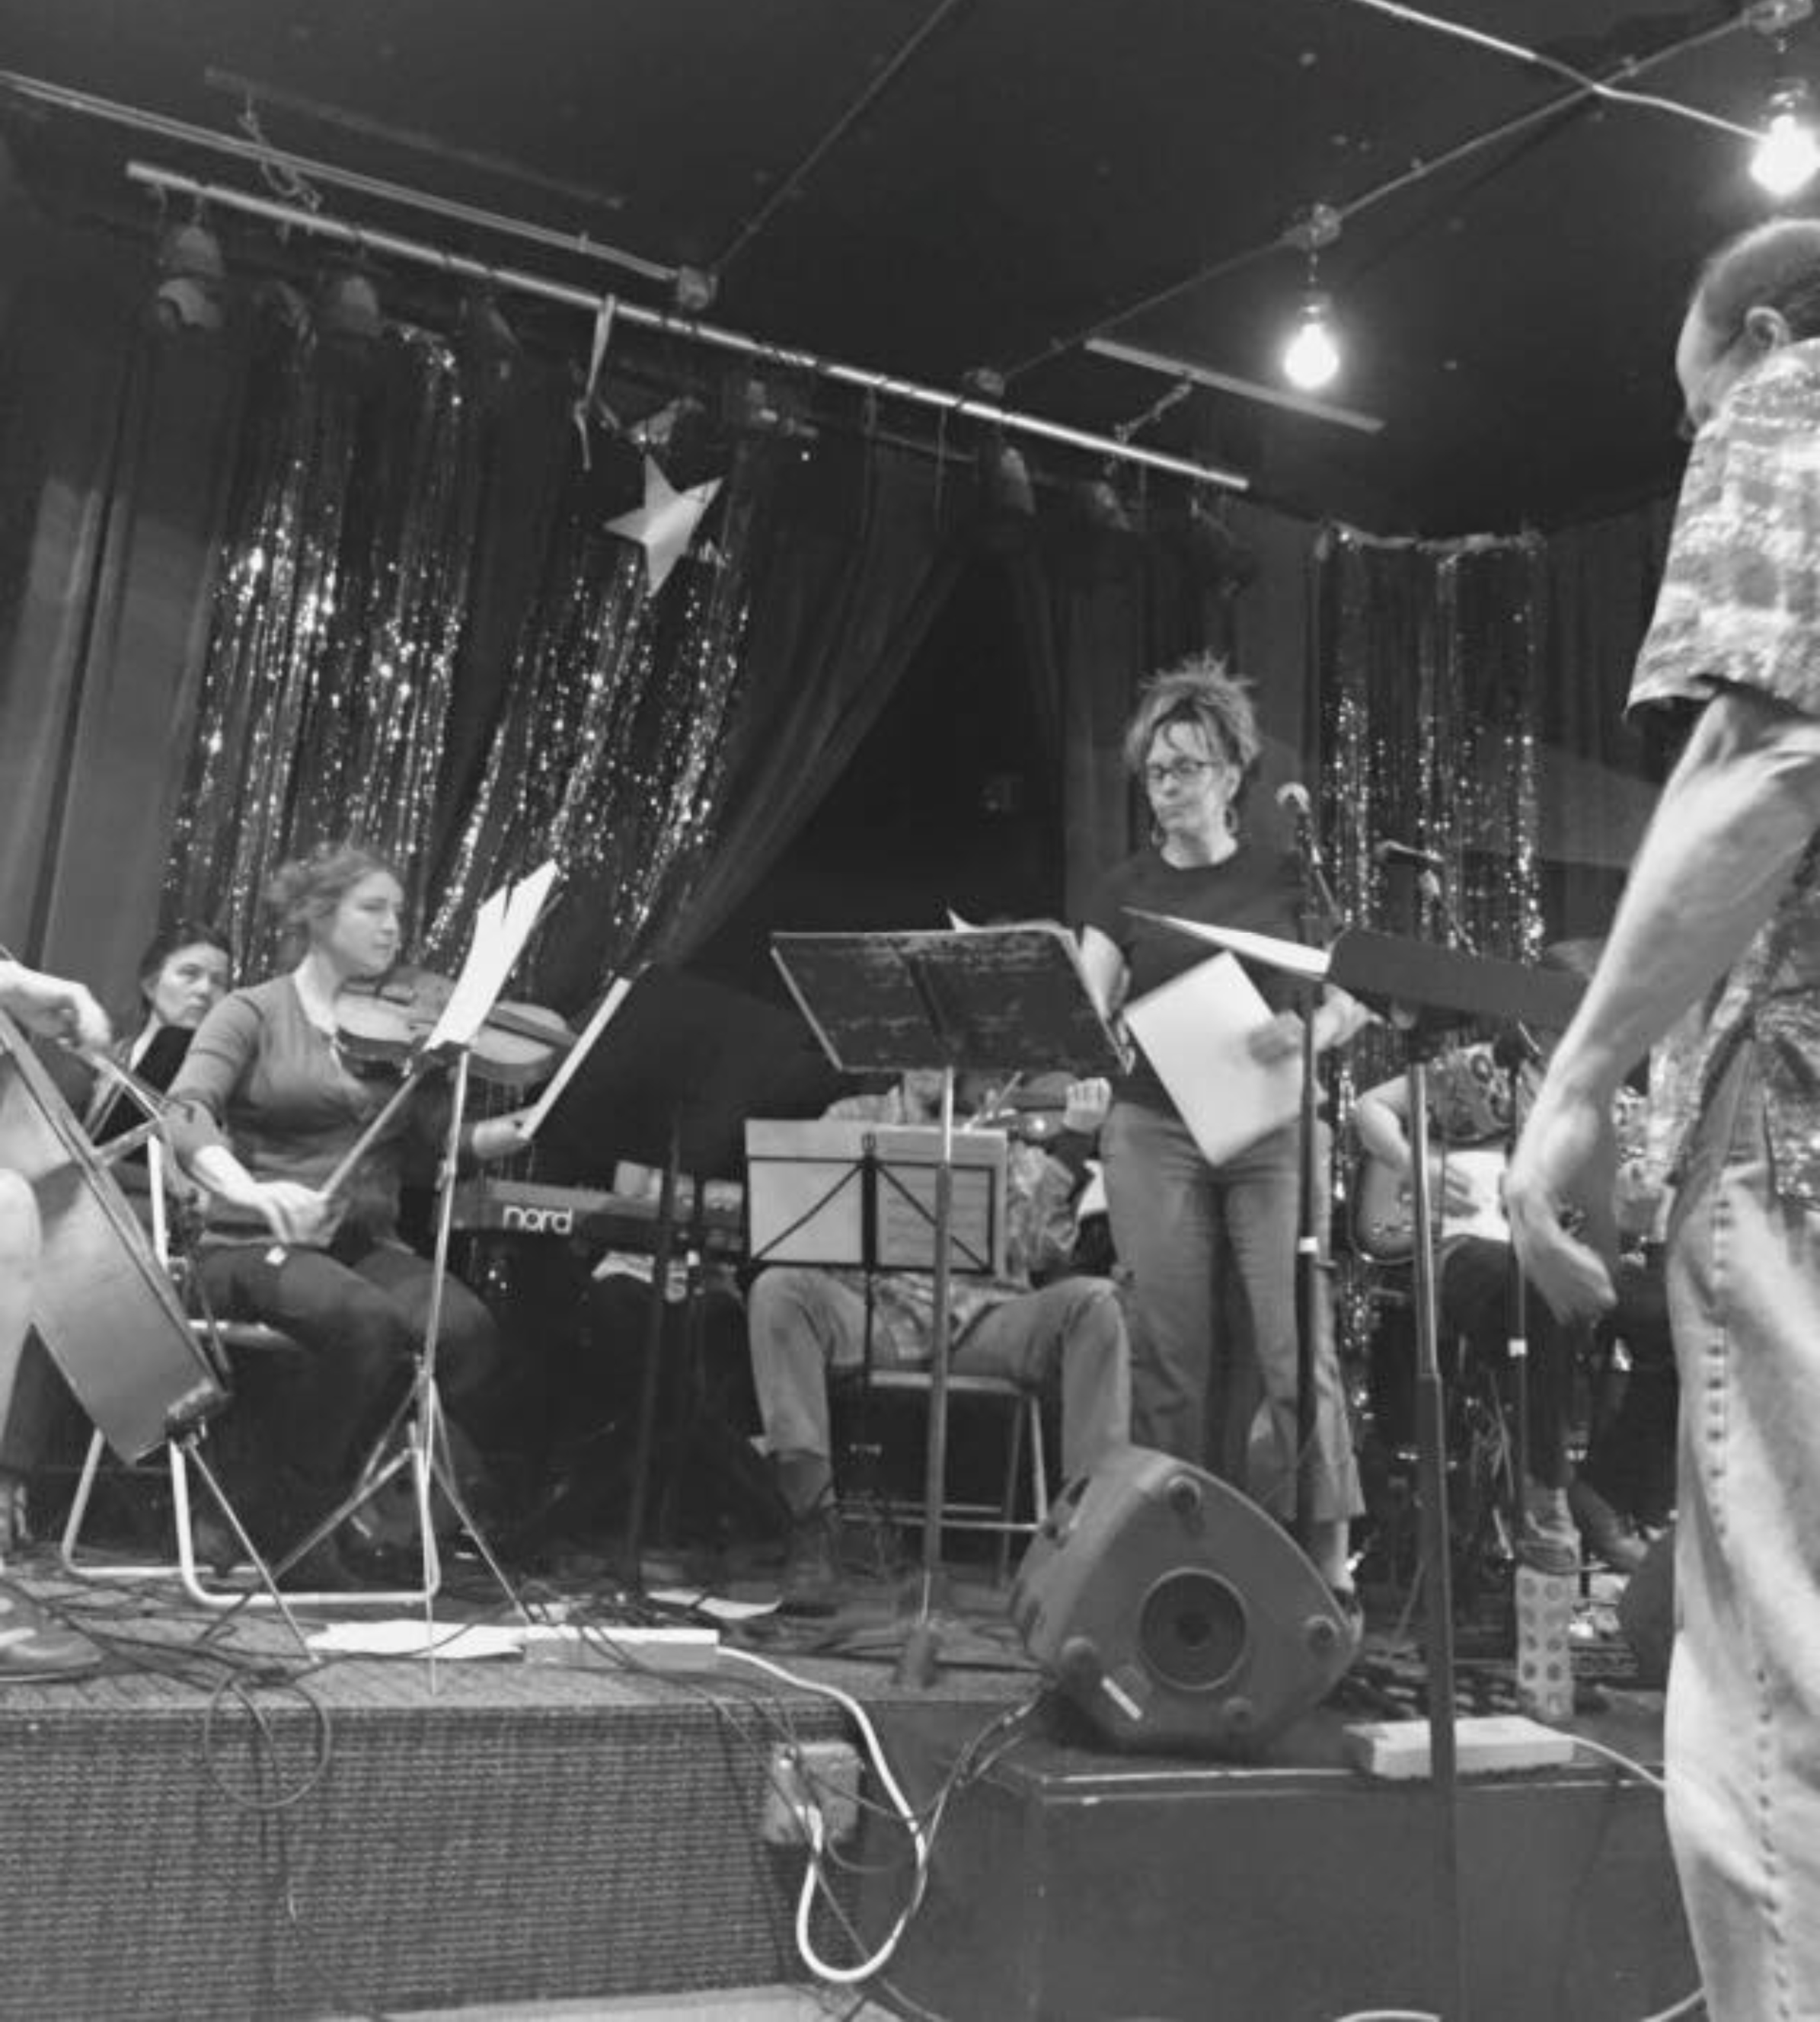 Gretta Harley's band Mettle in rehearsal (Photo by Taylor Bowen)